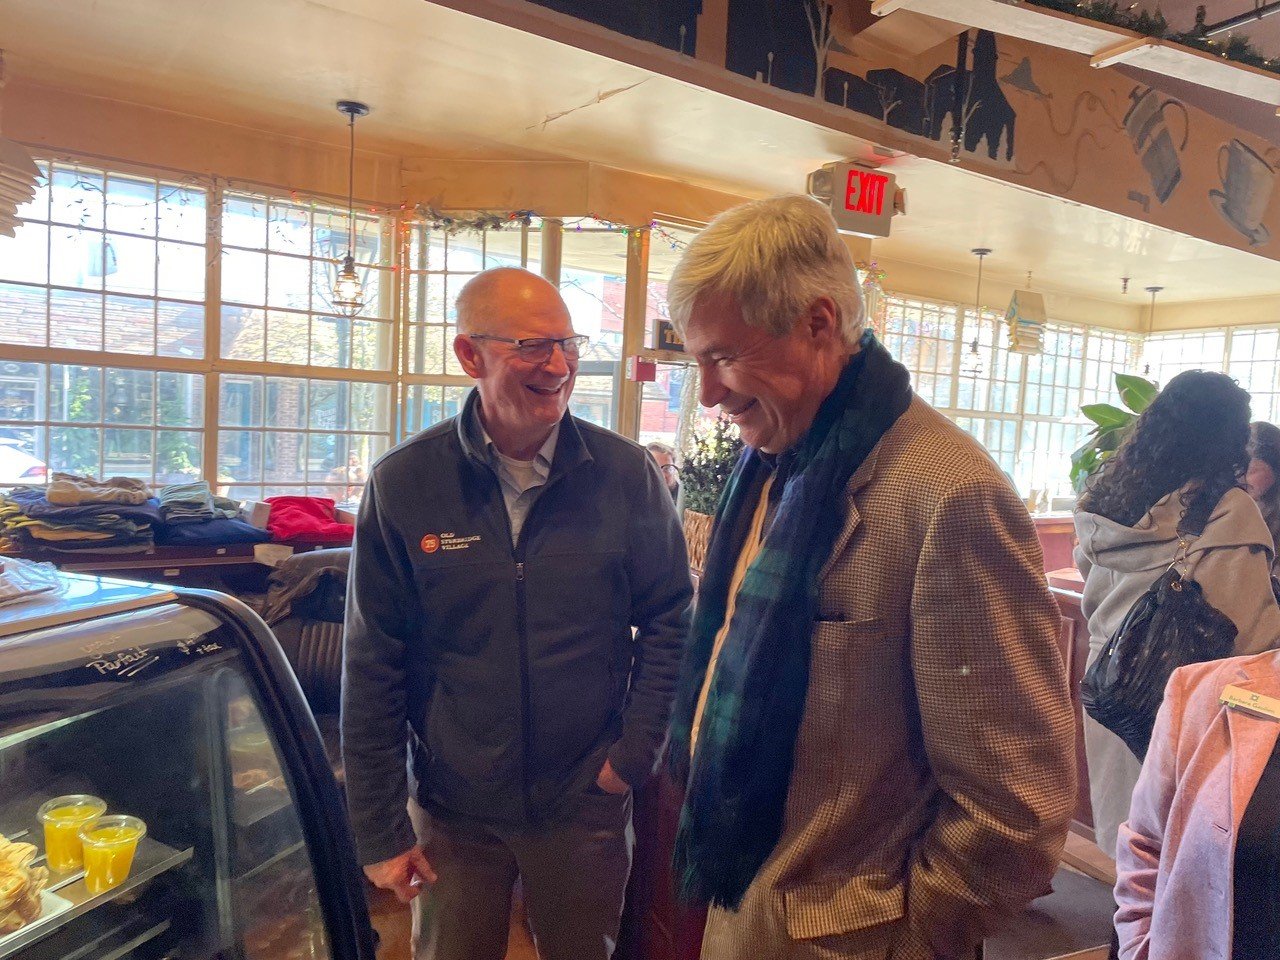 Senator Sheldon Whitehouse shares a laugh with Steve Lake, owner of the Coffee Depot, during a visit to the coffee shop last Tuesday morning.